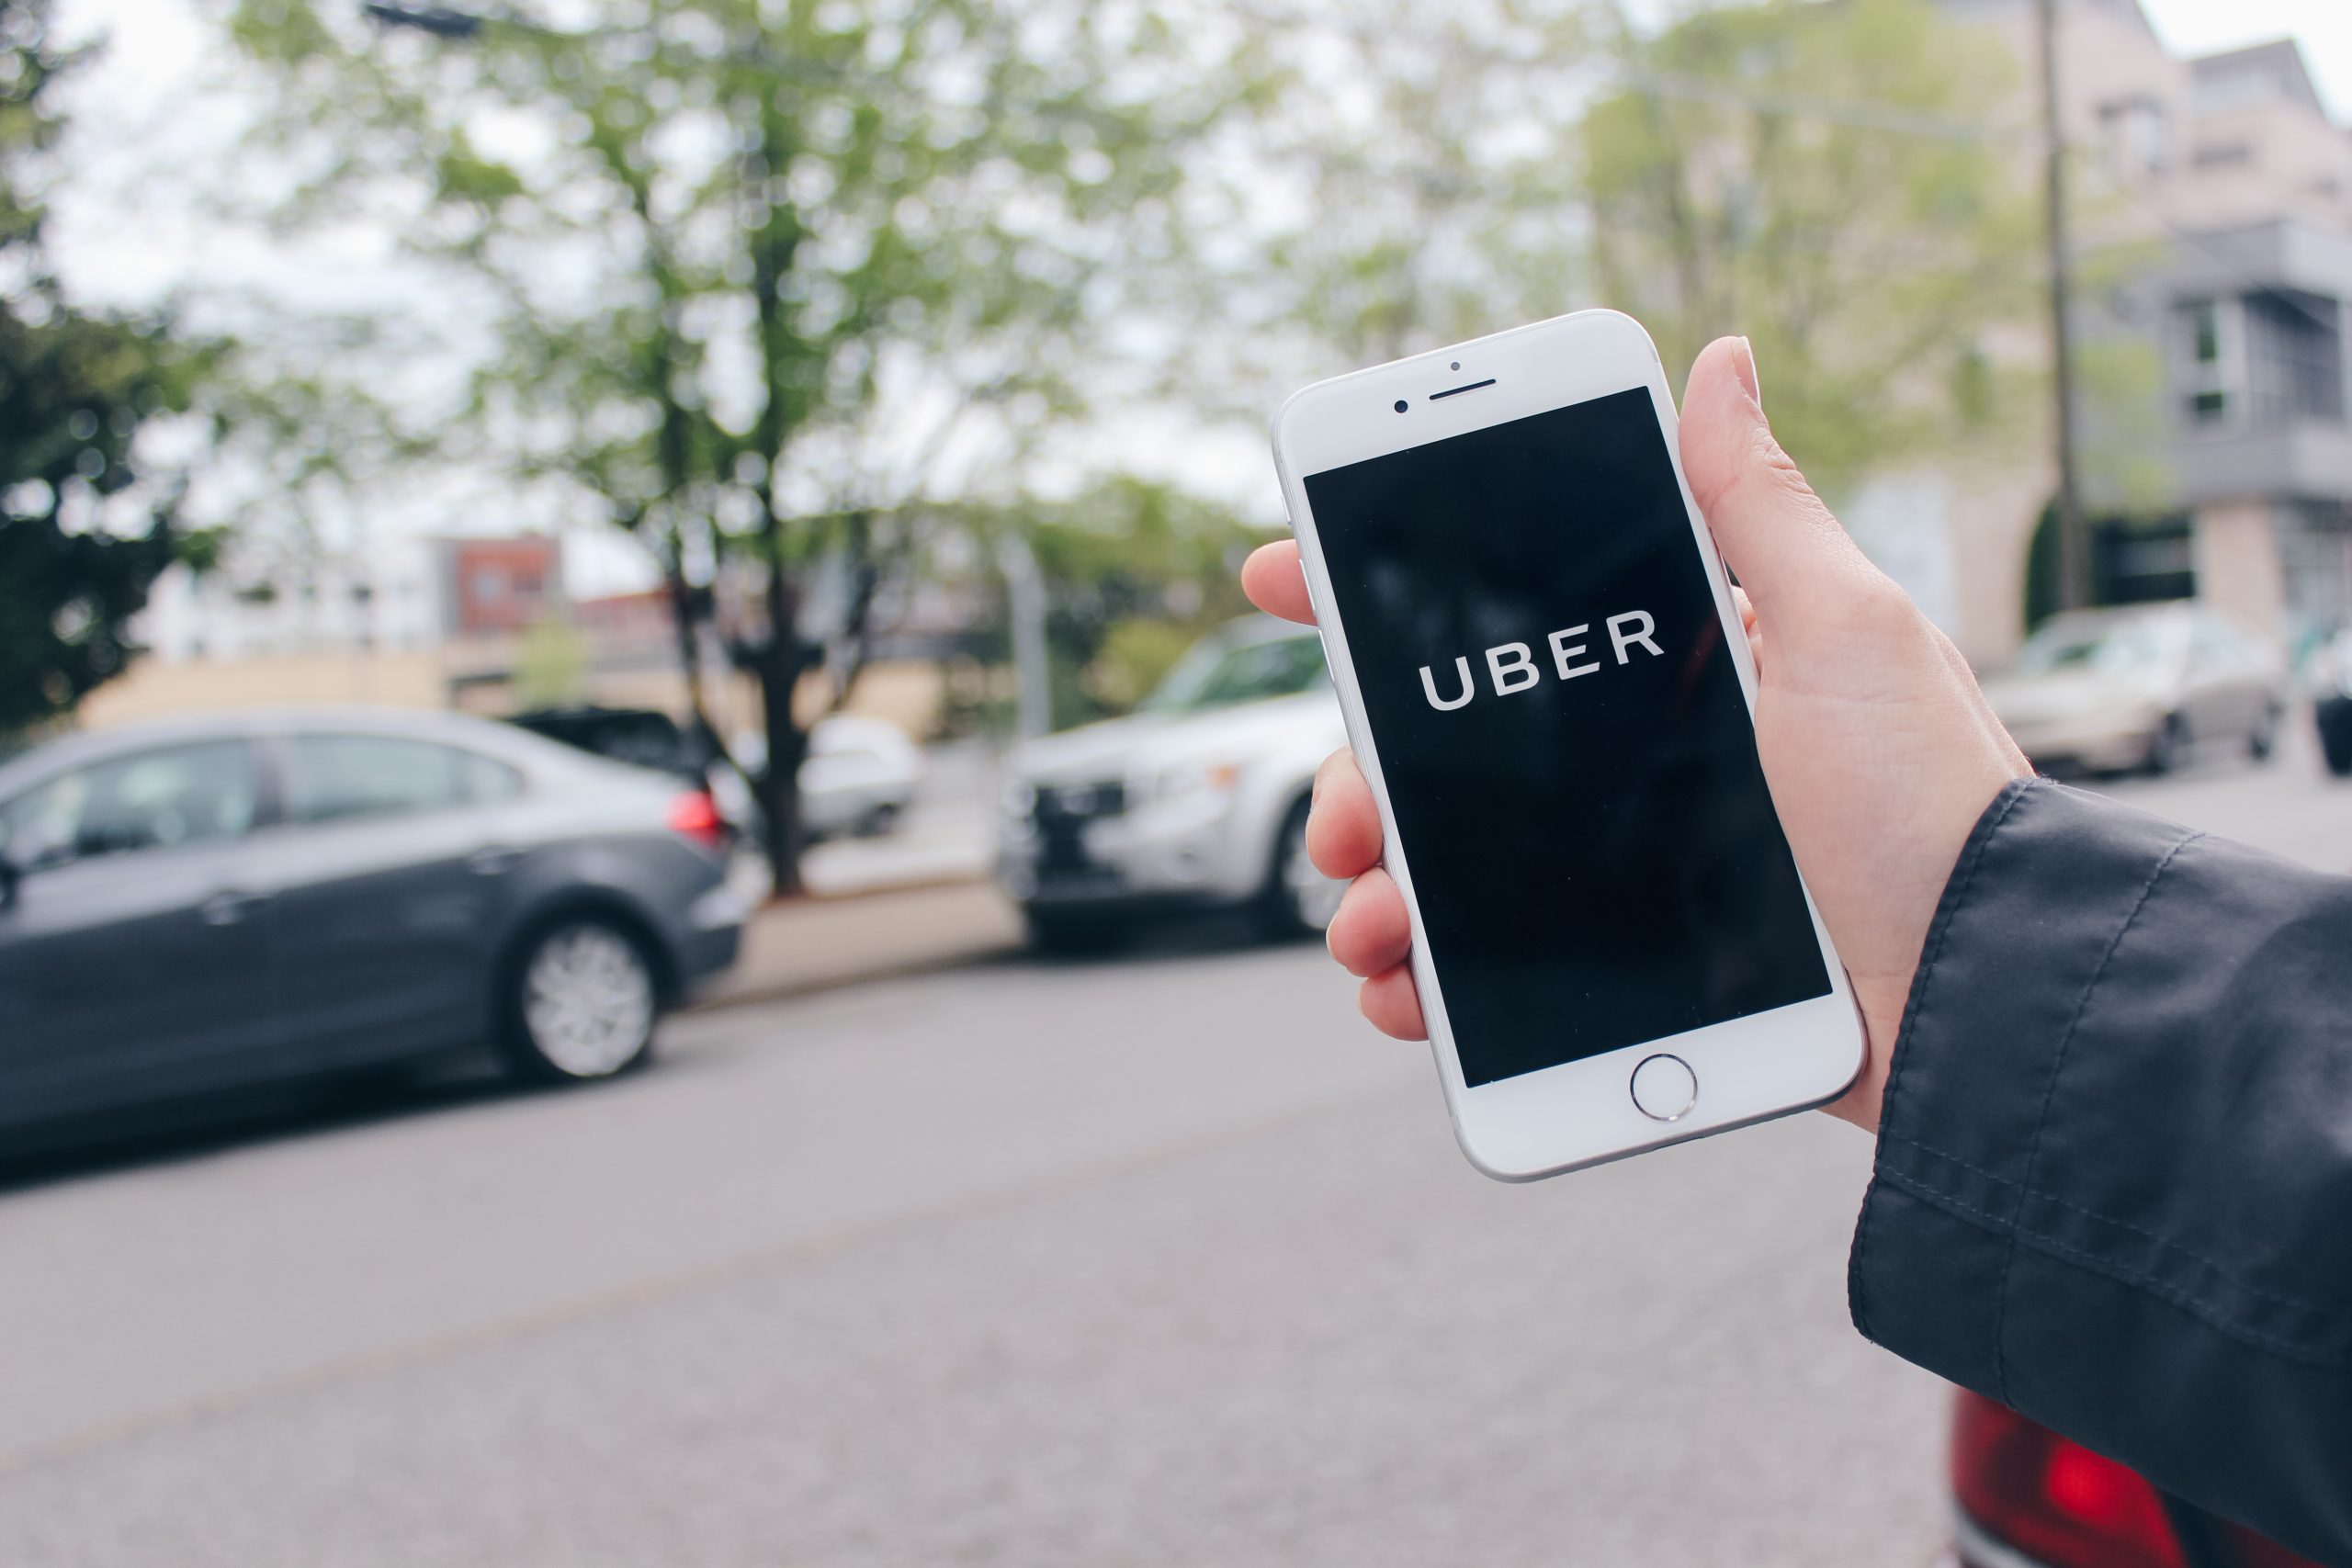 The UK has reached a deal with Uber.